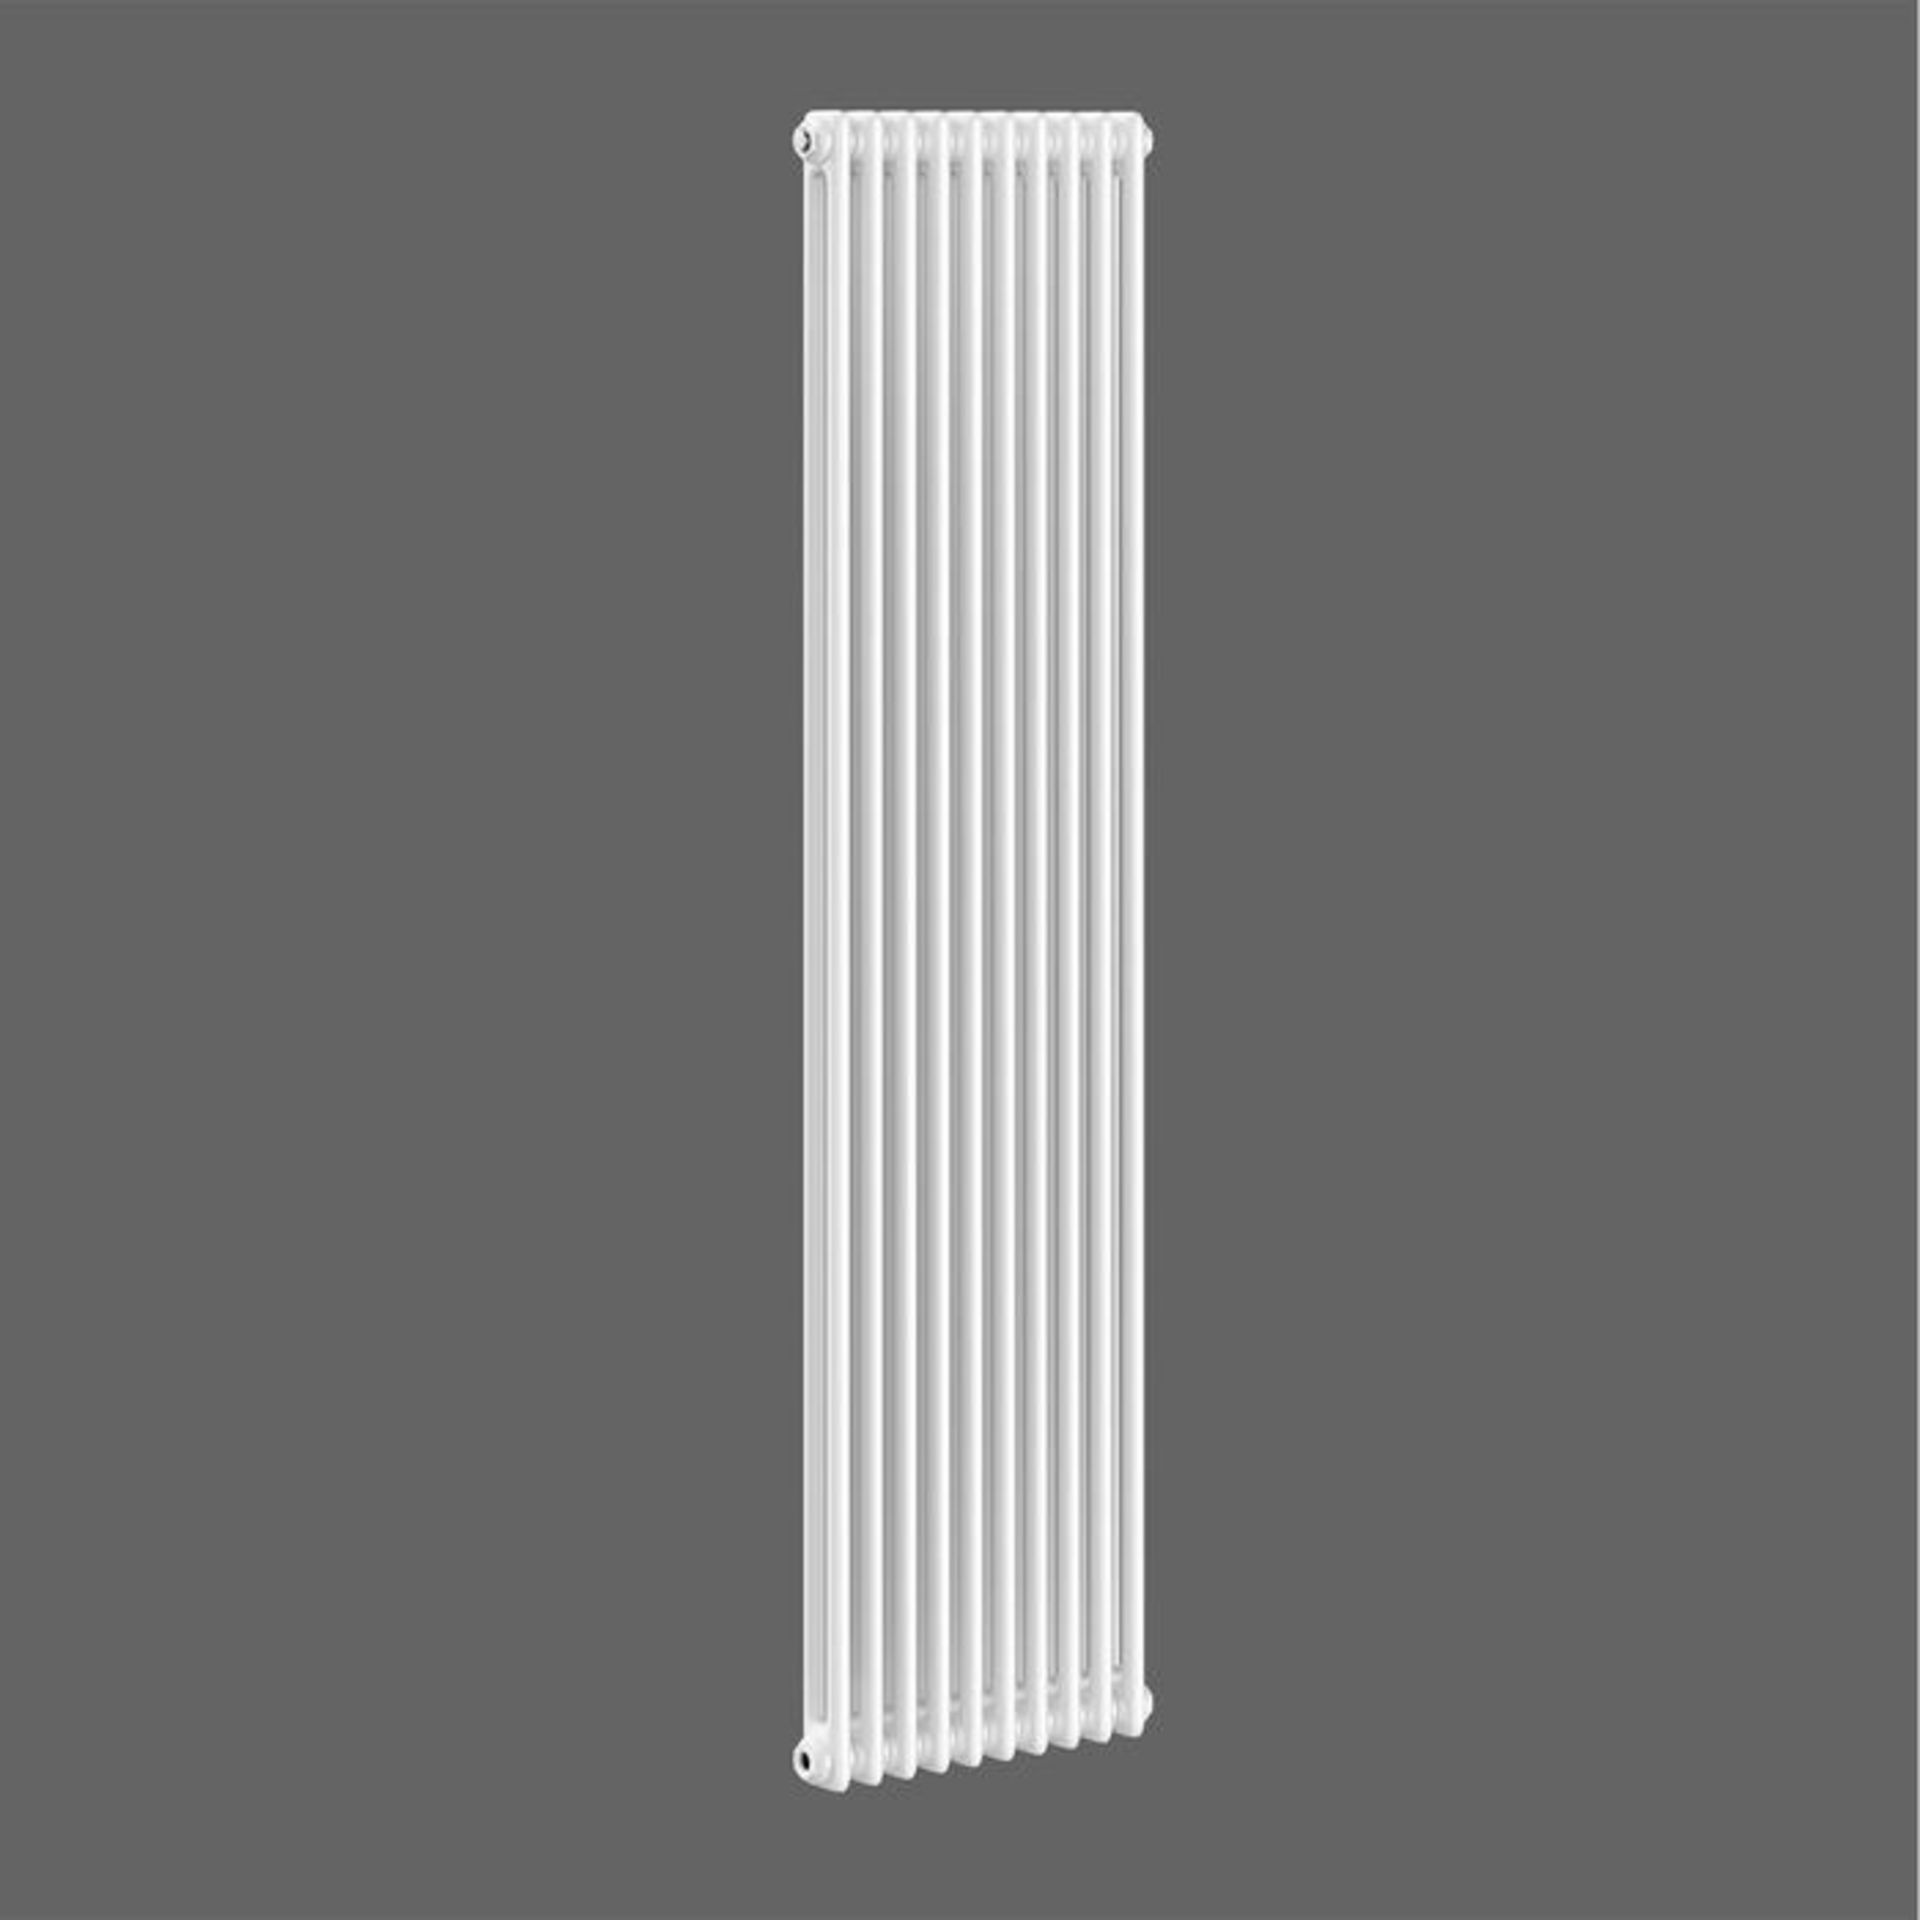 (PC143) 2000x490mm White Double Panel Vertical Colosseum Traditional Radiator. RRP £488.99. Ma...( - Image 3 of 3